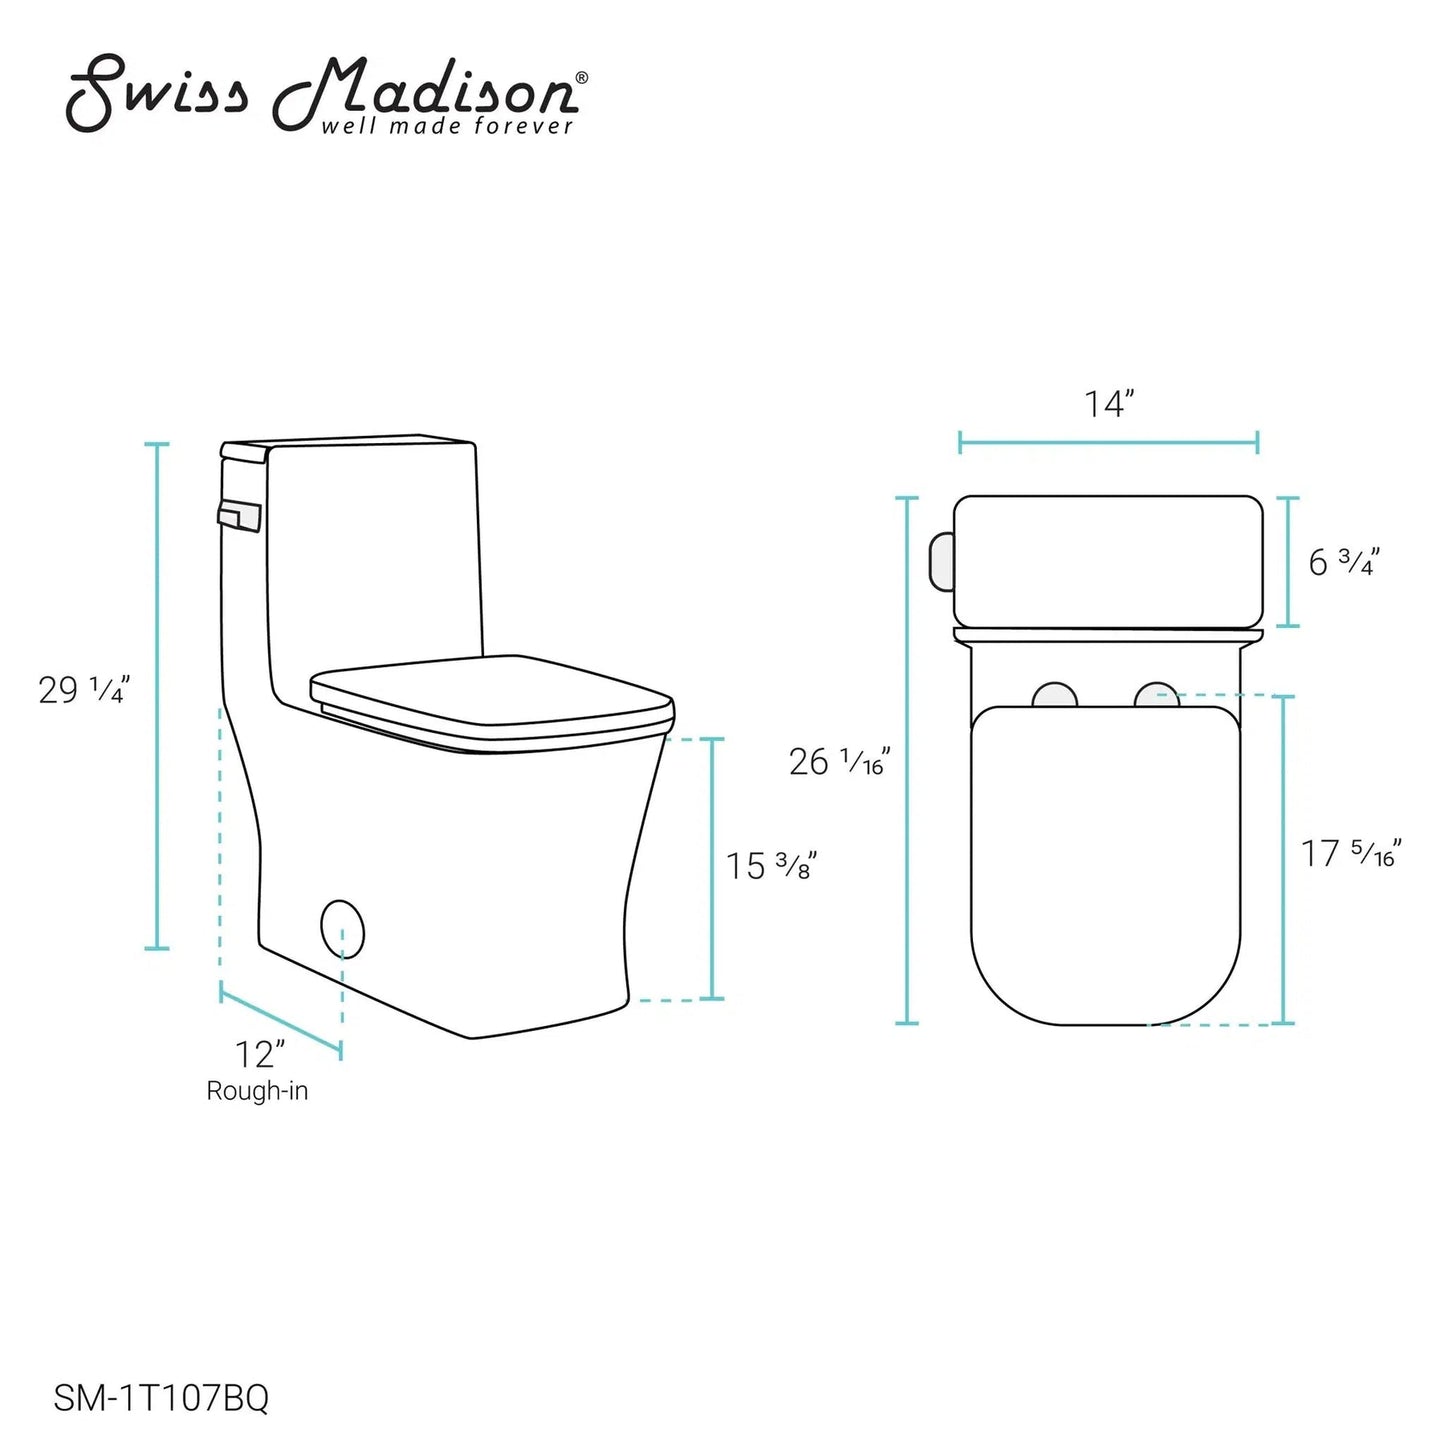 Swiss Madison Concorde 14" x 29" Bisque One-Piece Elongated Square Floor Mounted Toilet With 1.28 GPF Side Flush Function